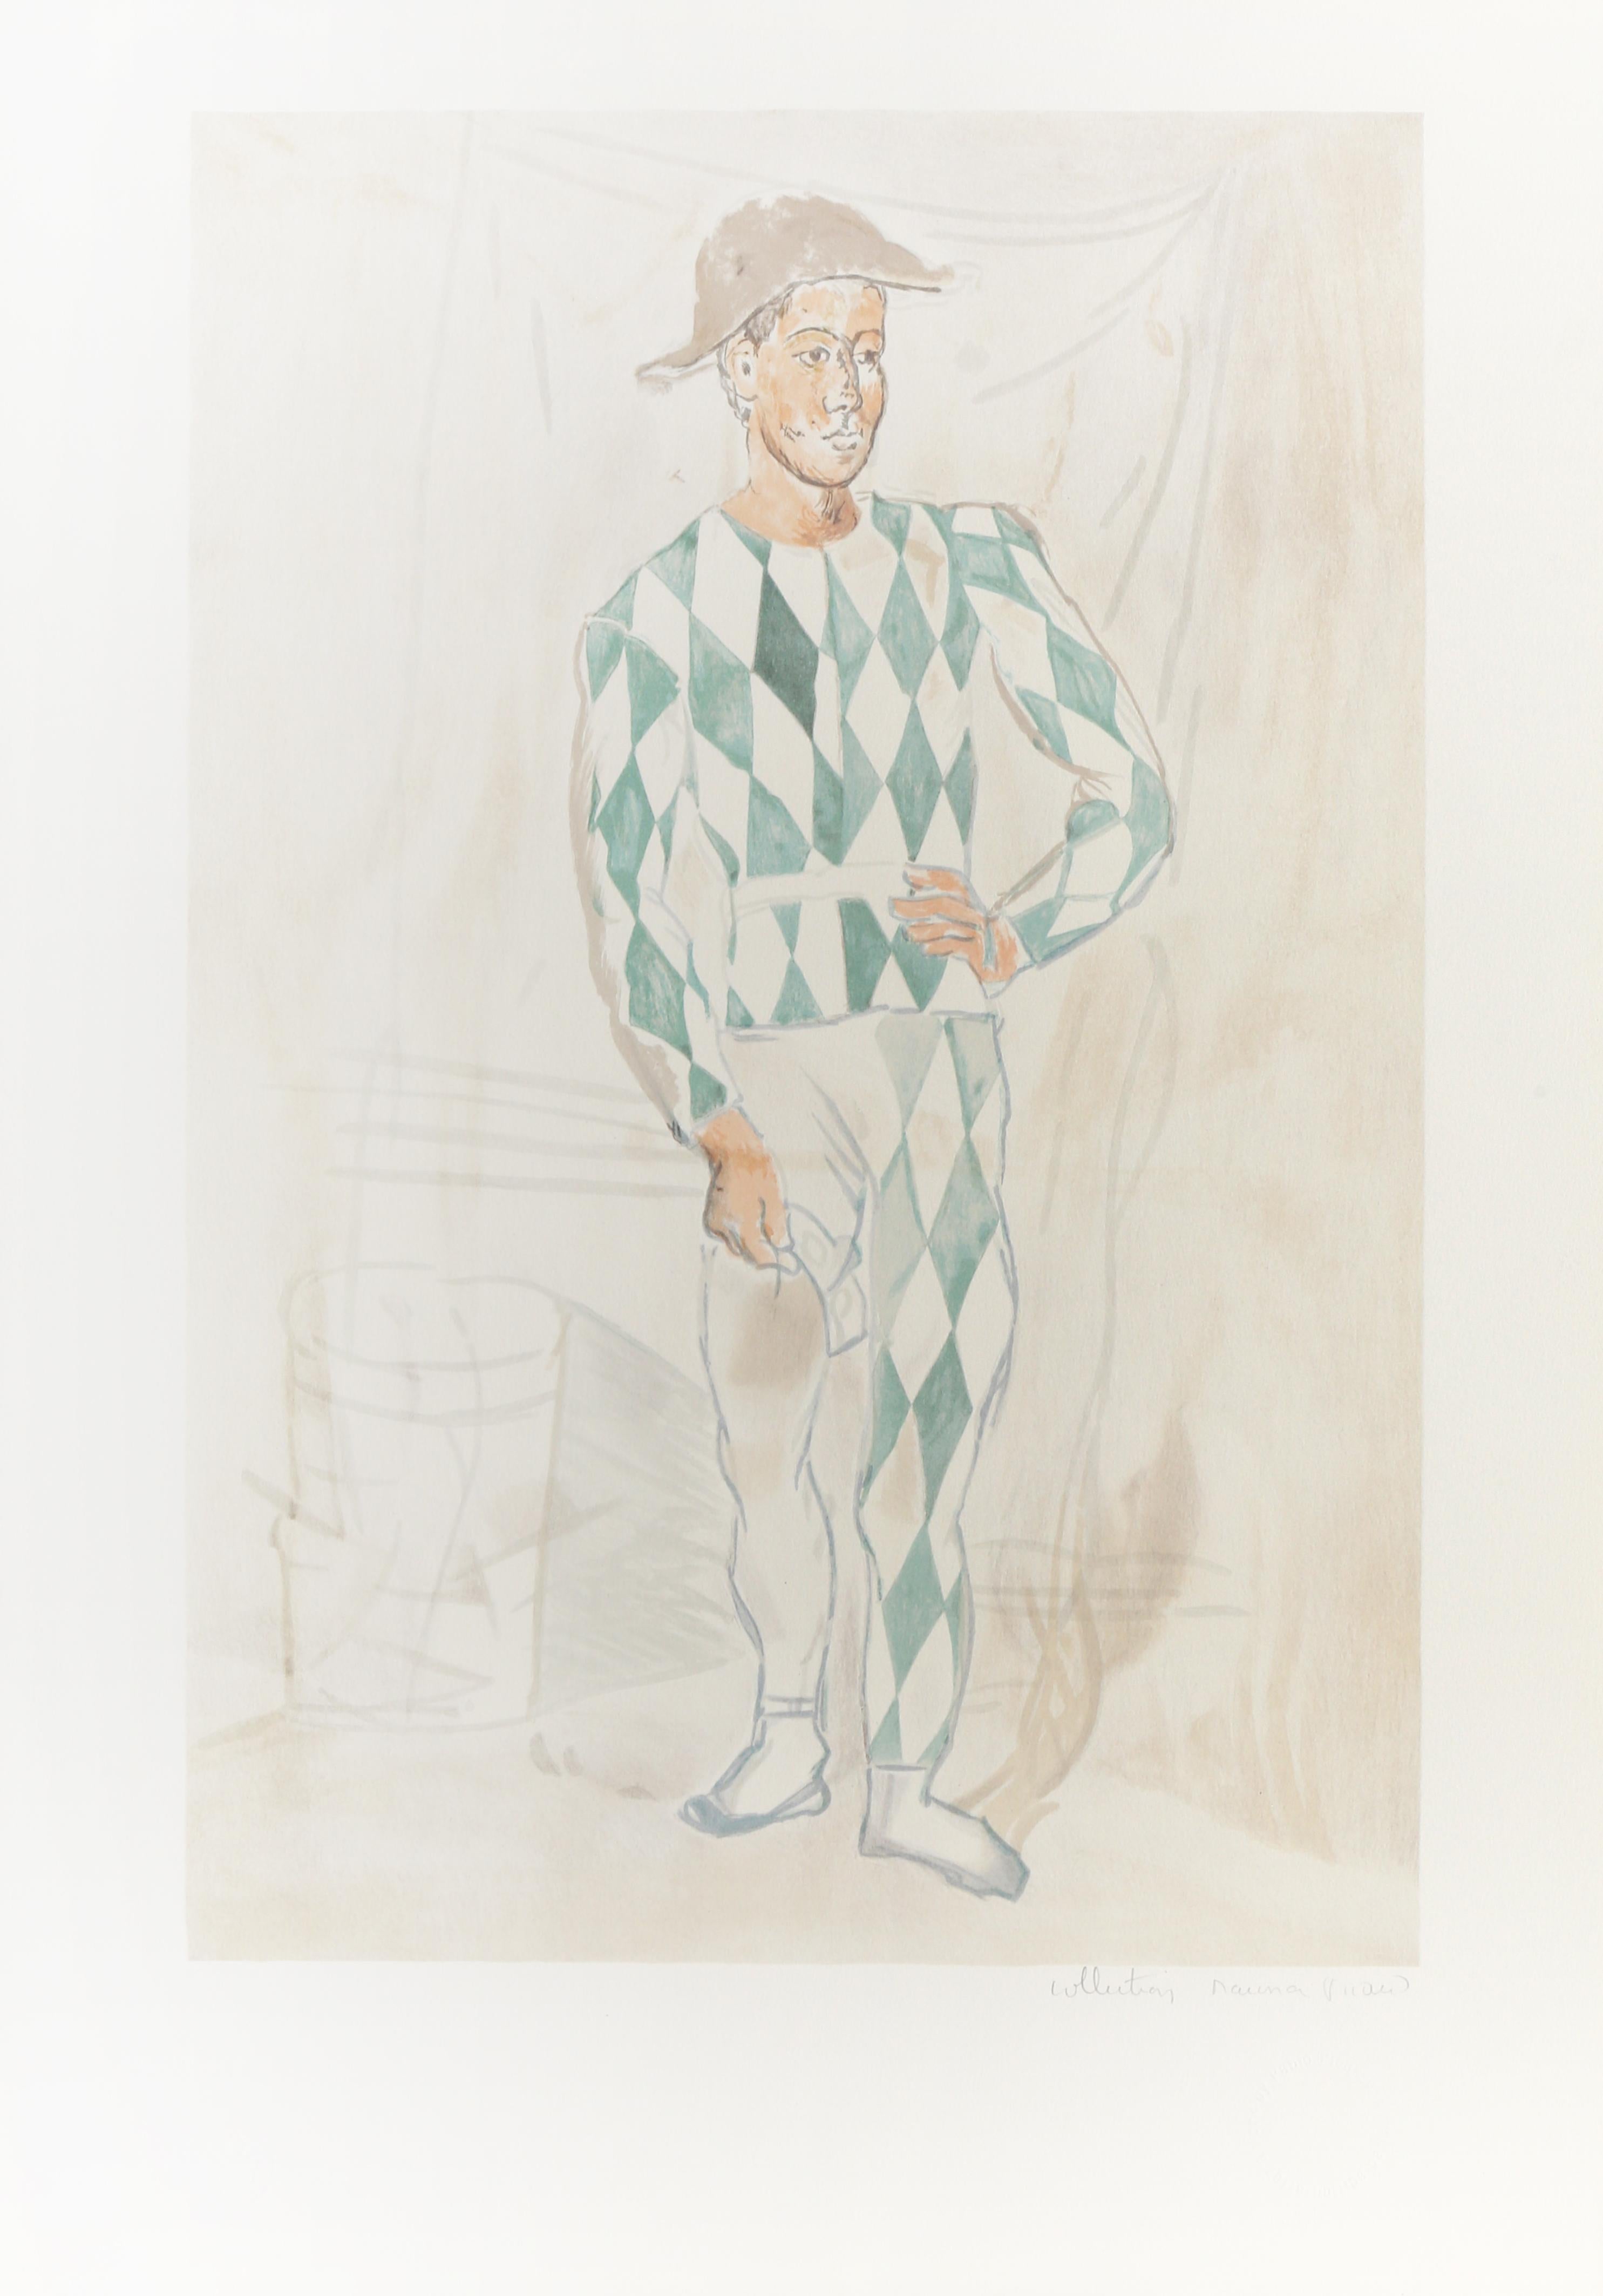 Pablo Picasso Abstract Print - Arlequin en Pied